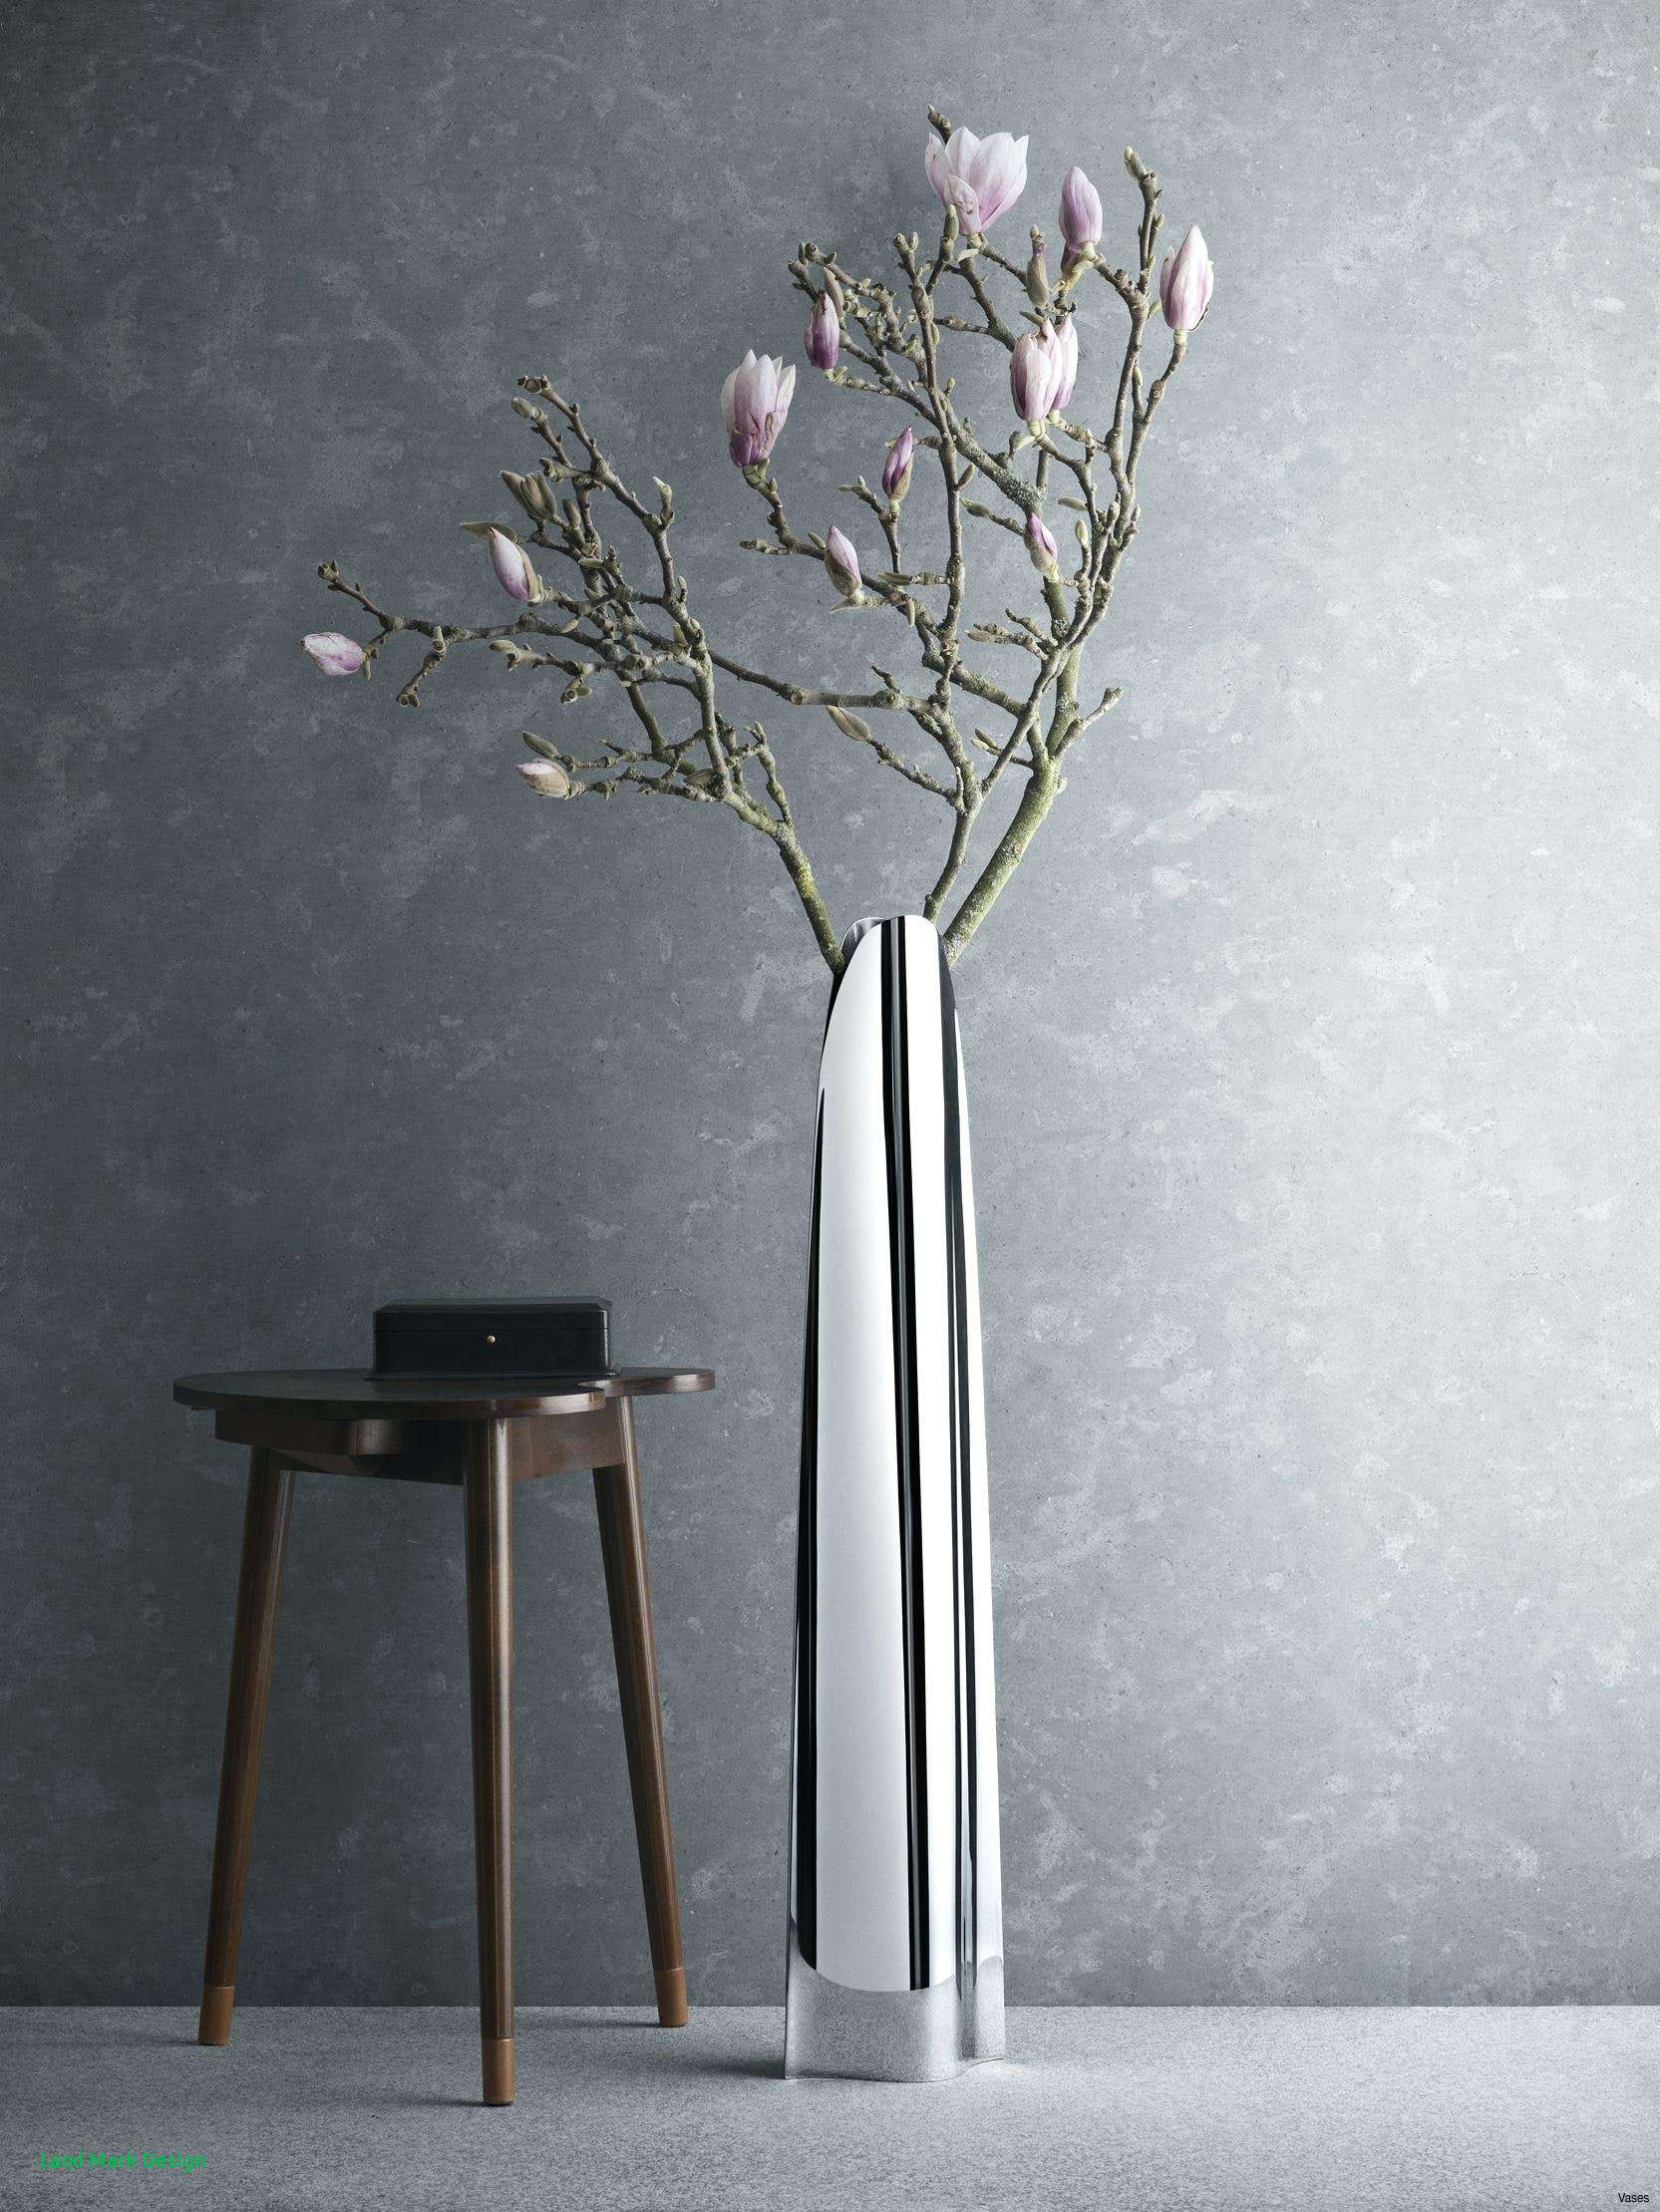 30 Awesome 36 Inch Tall Floor Vase 2024 free download 36 inch tall floor vase of tall floor vases contemporary design home design pertaining to silver floor vases vase tall standing uk modern with flowersh flowersi 0d